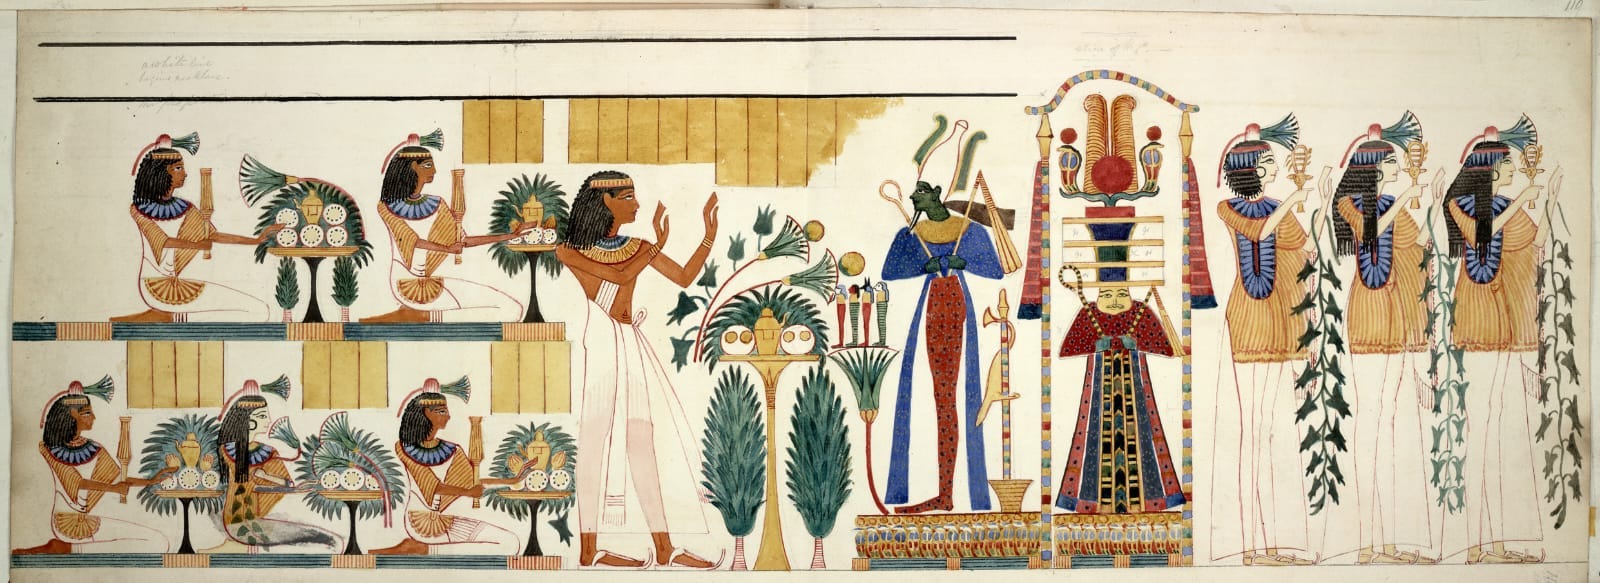 Antique egyptian painting depicting gods and different hyerarchies of people, each dressed differently